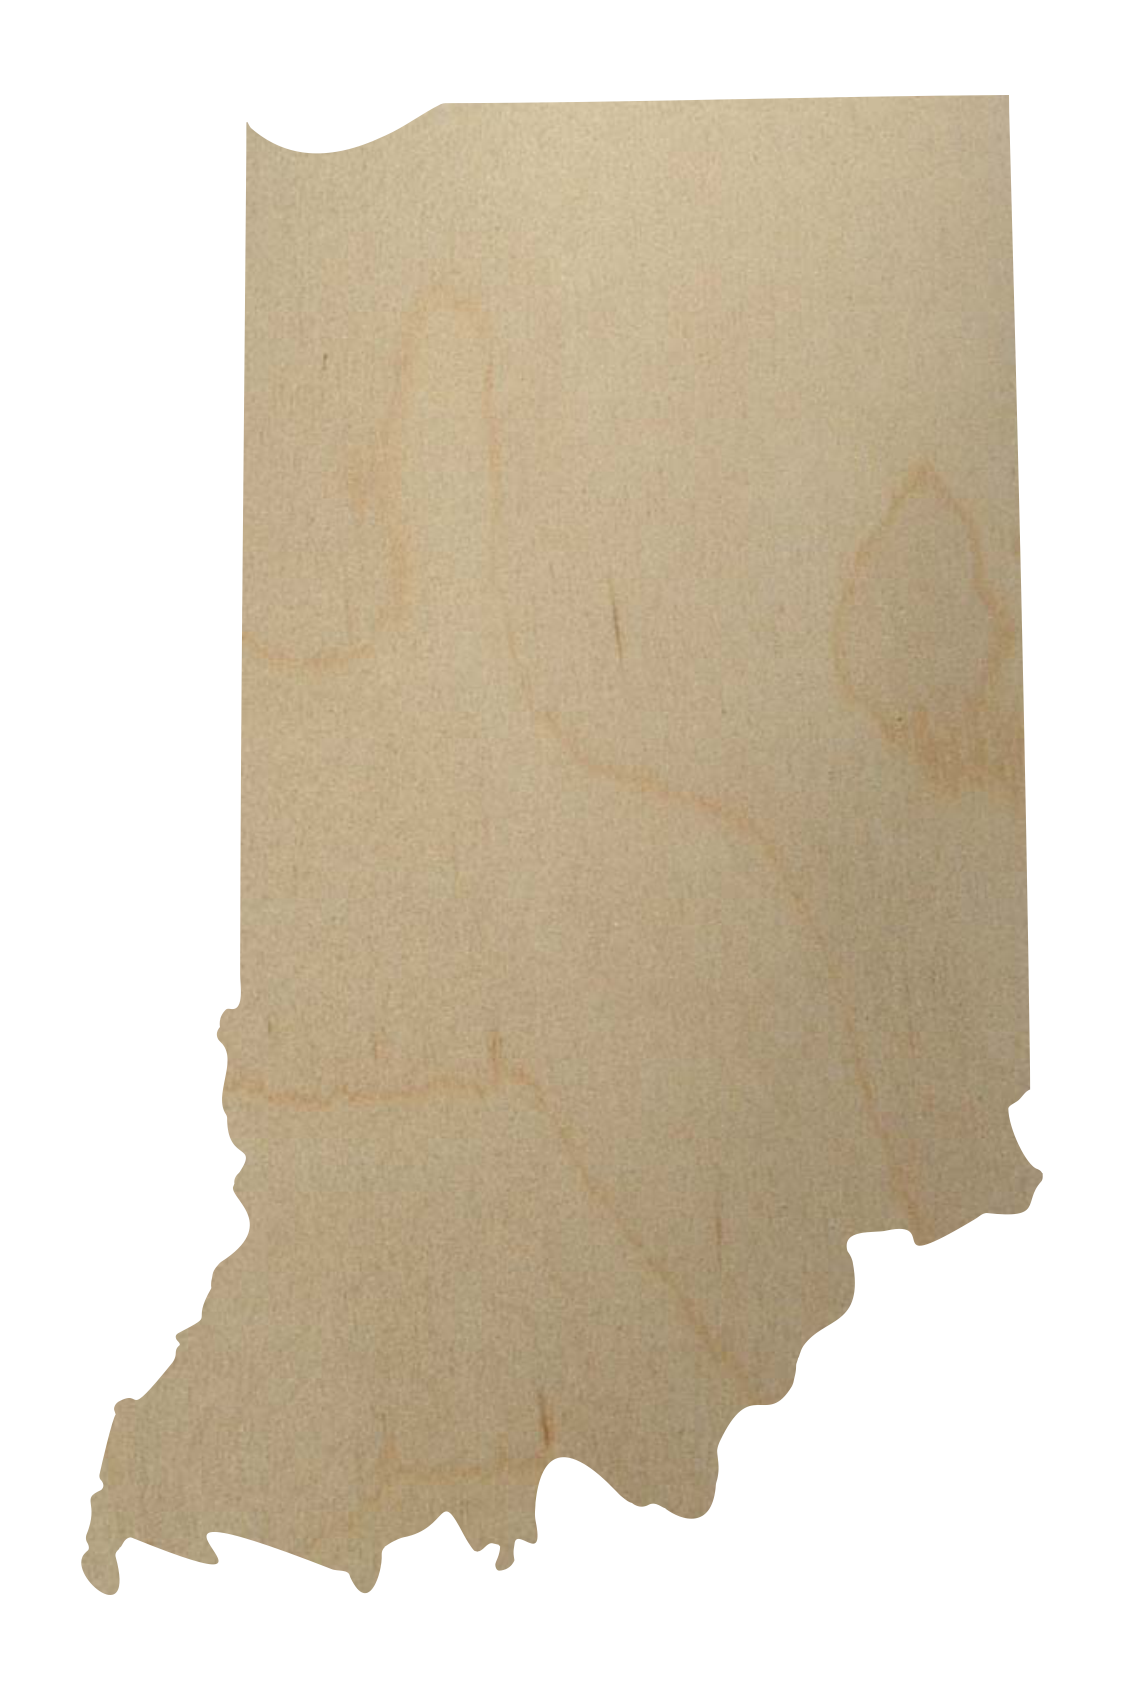 Wooden Indiana state shape cutout for craft projects, decorating or creatin...